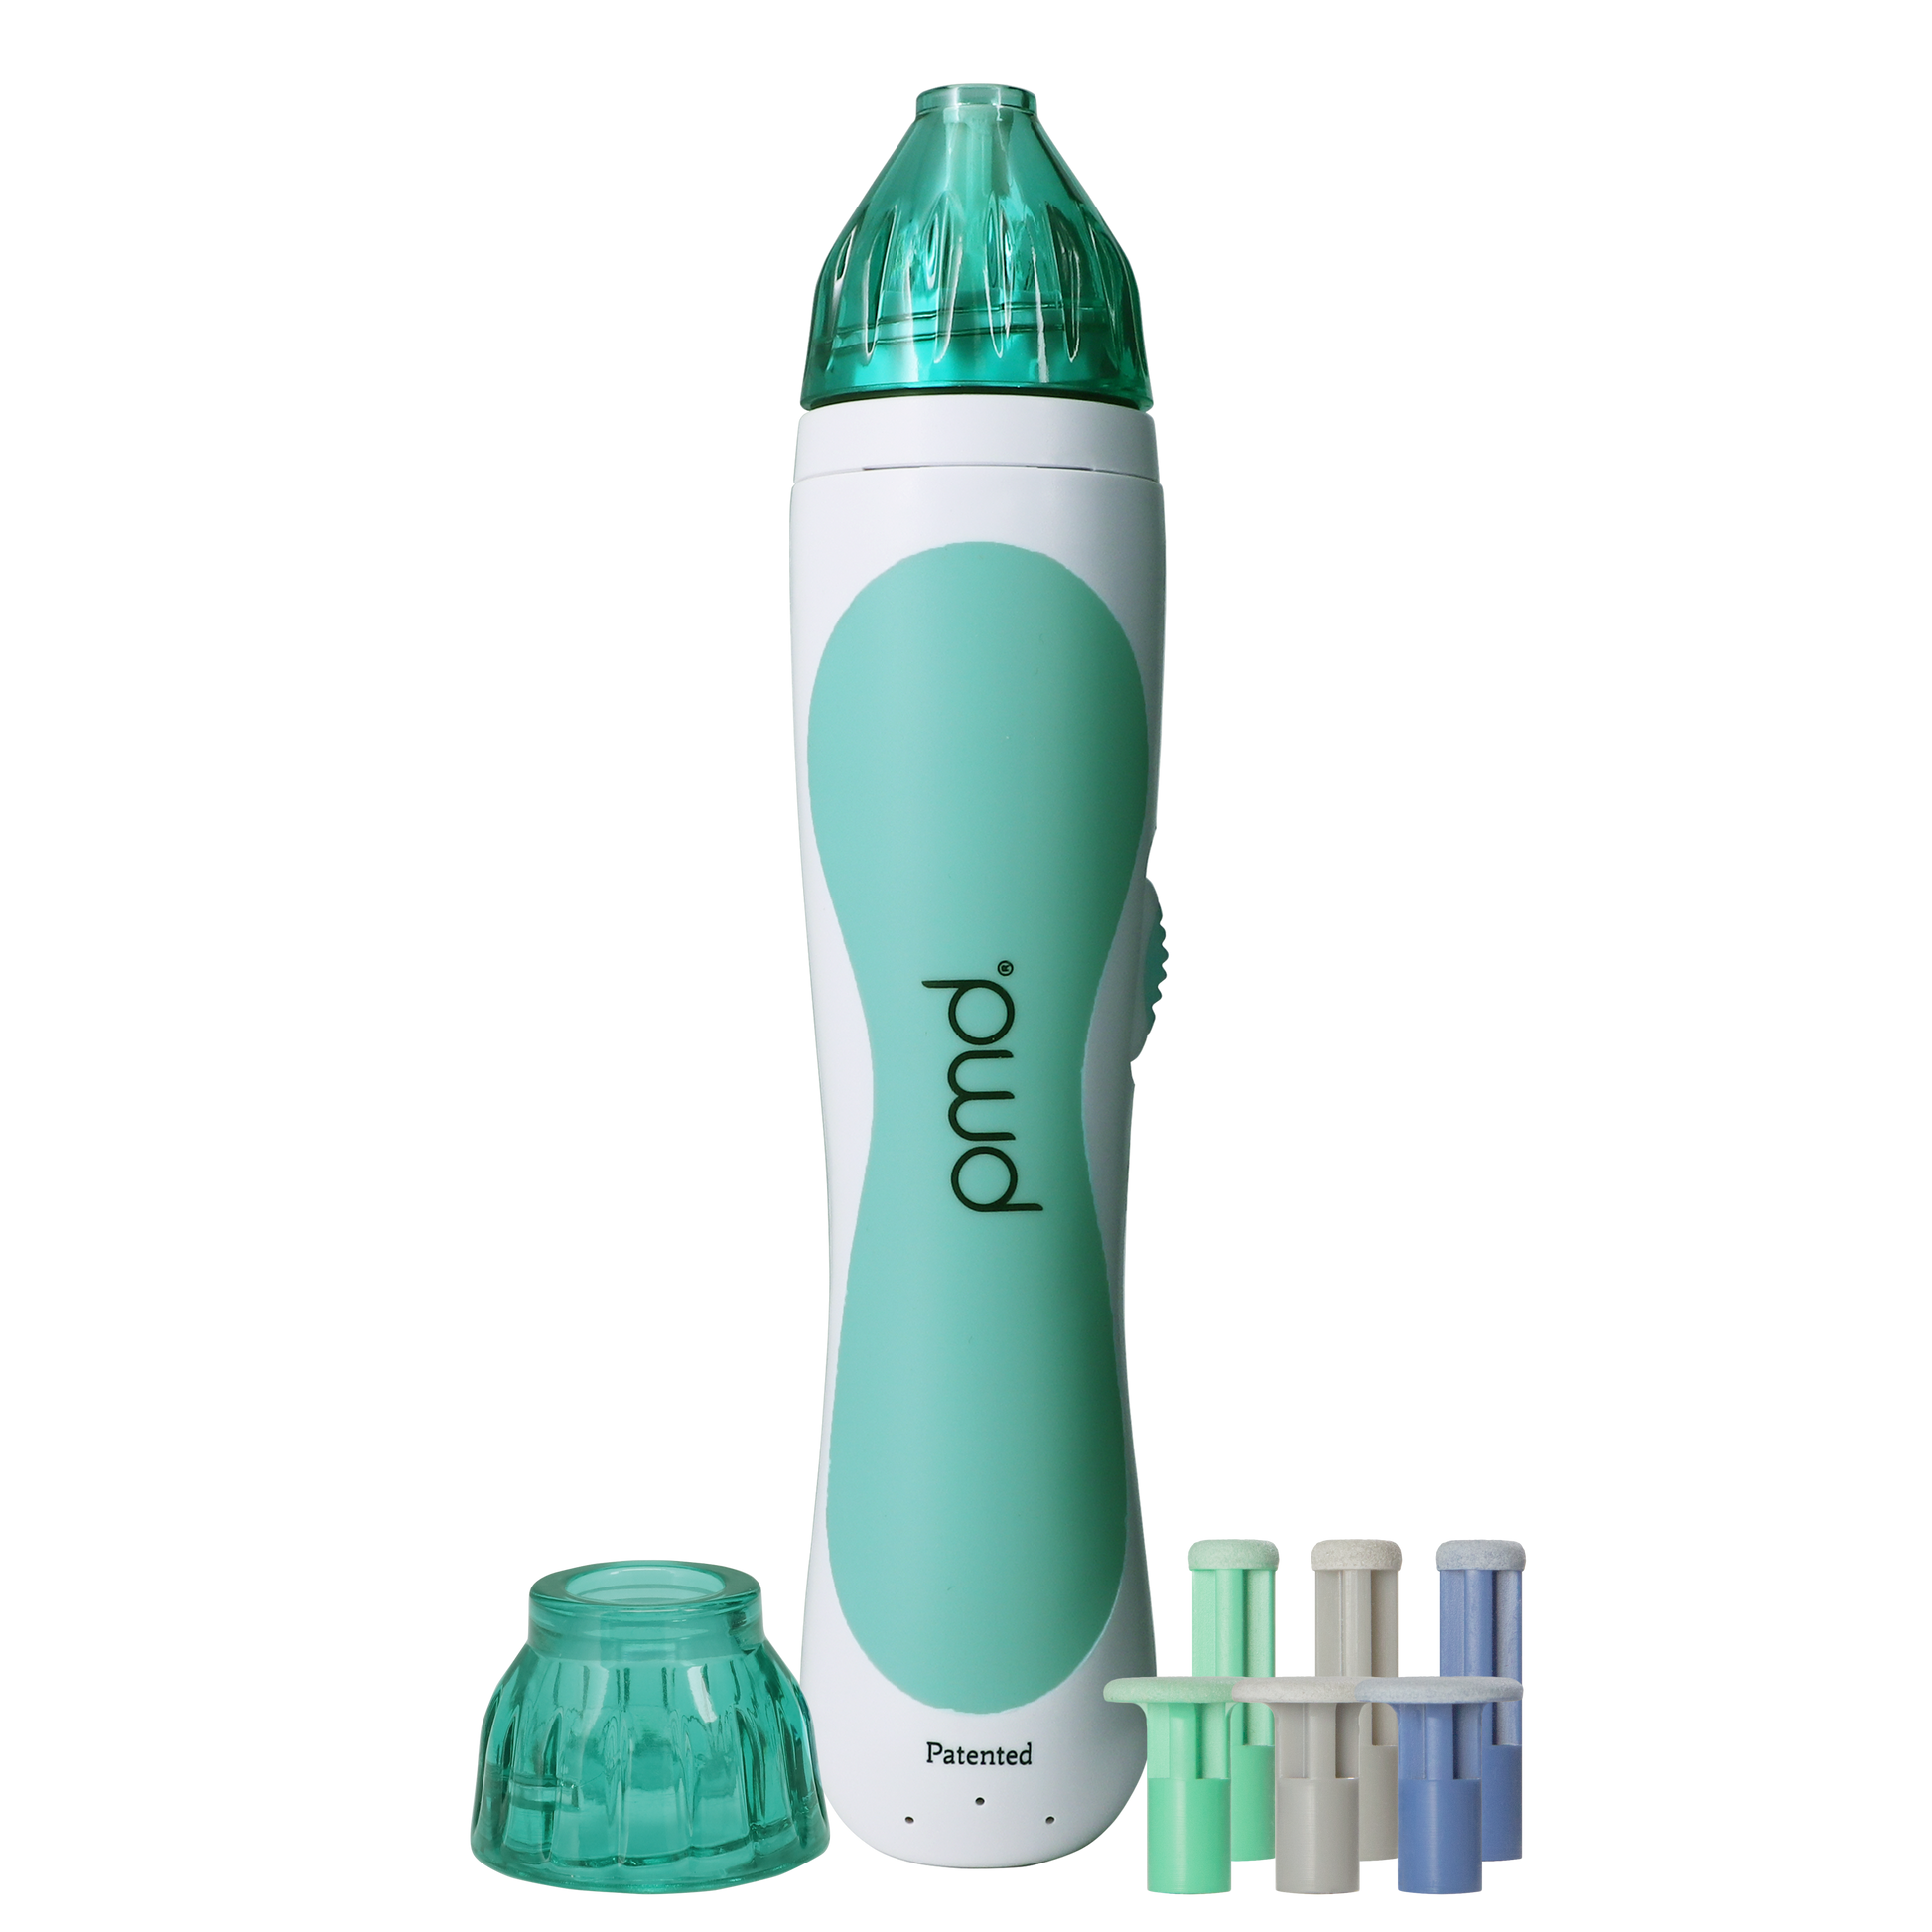 fresh_face_classic_bundle_teal?Personal Microderm Classic in Teal